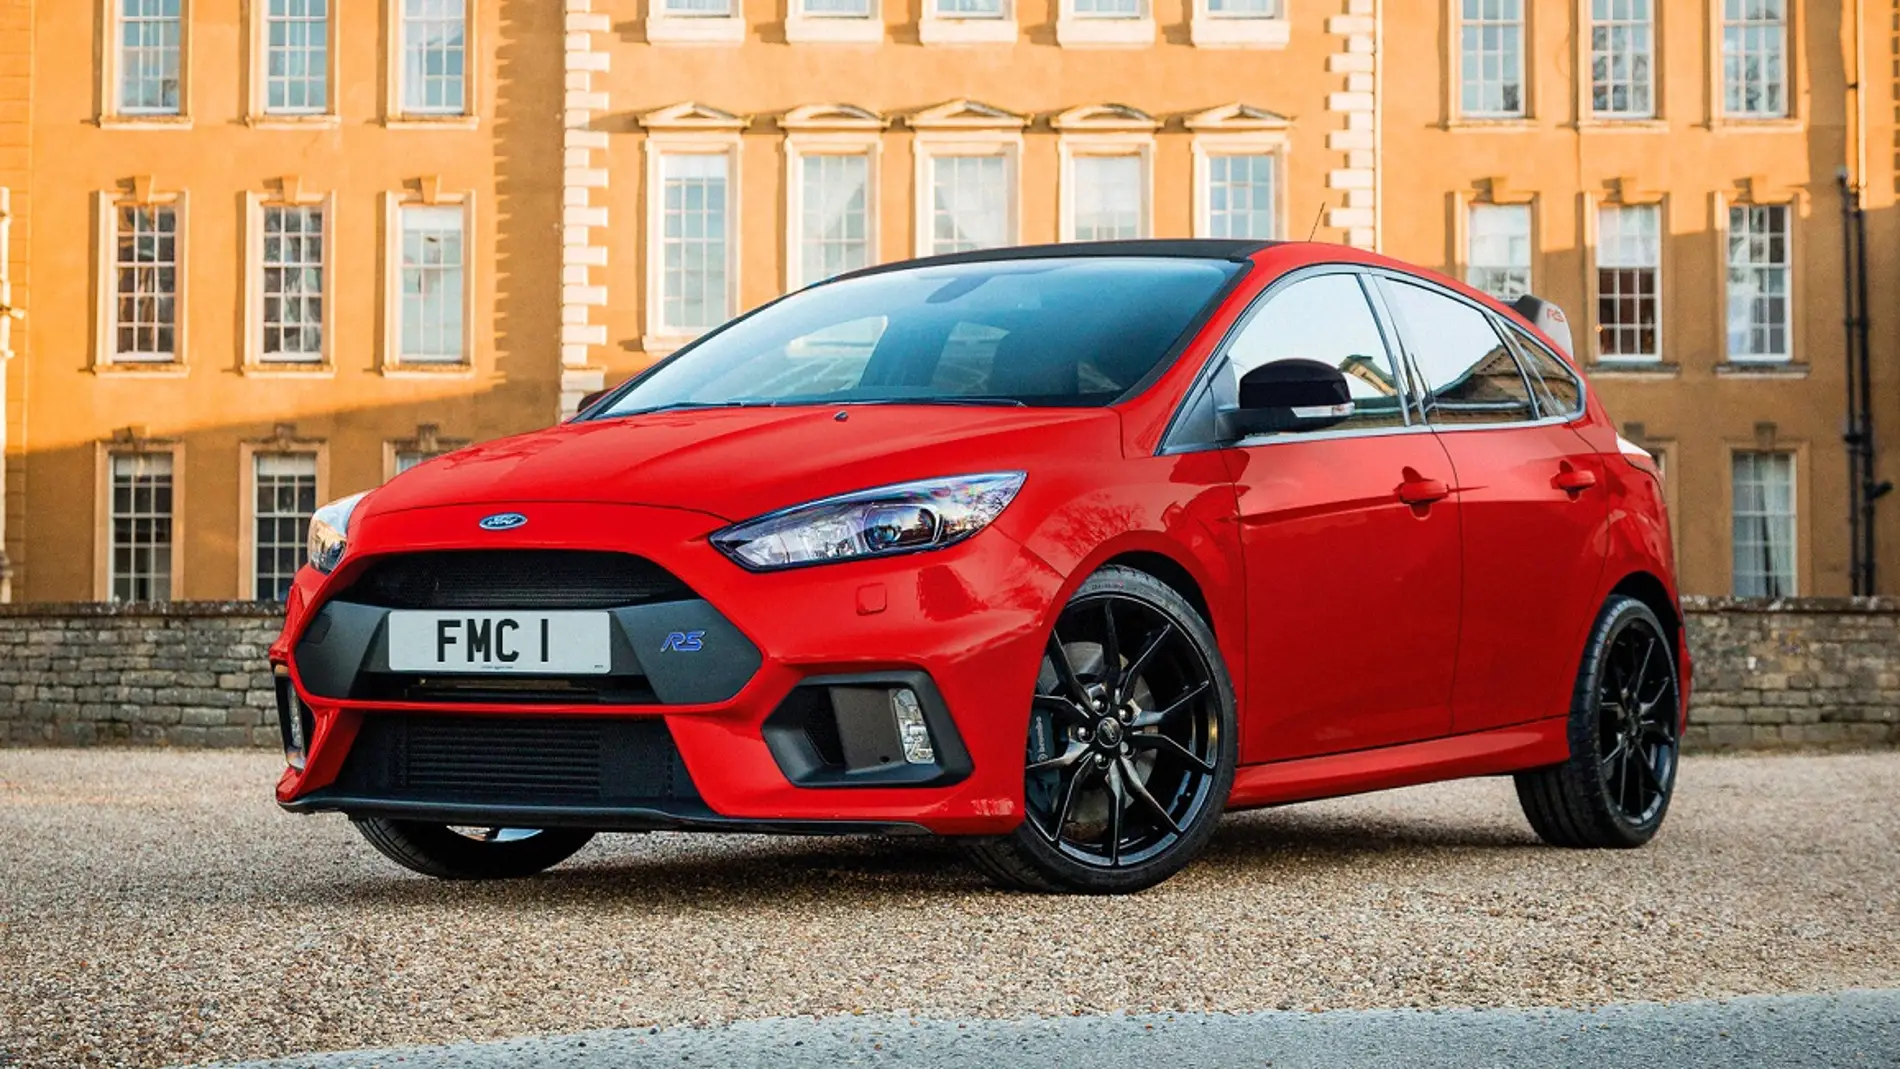 RS-Edition-now-available-to-order-in-Race-Red.jpg